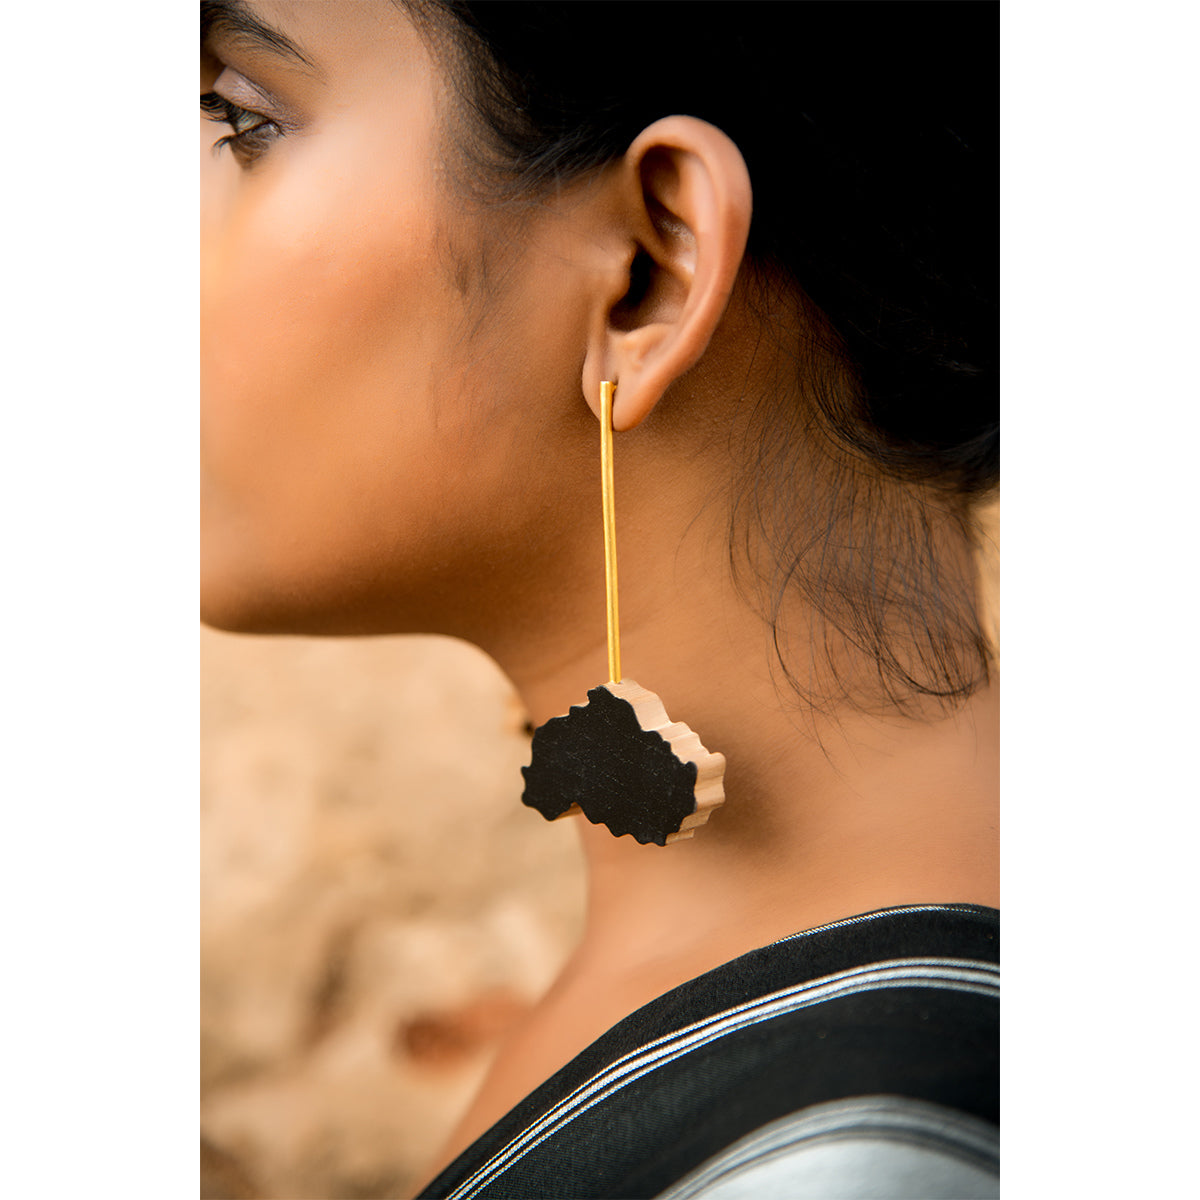 The black earrings are handcrafted using reclaimed teak wood and gold plated brass.